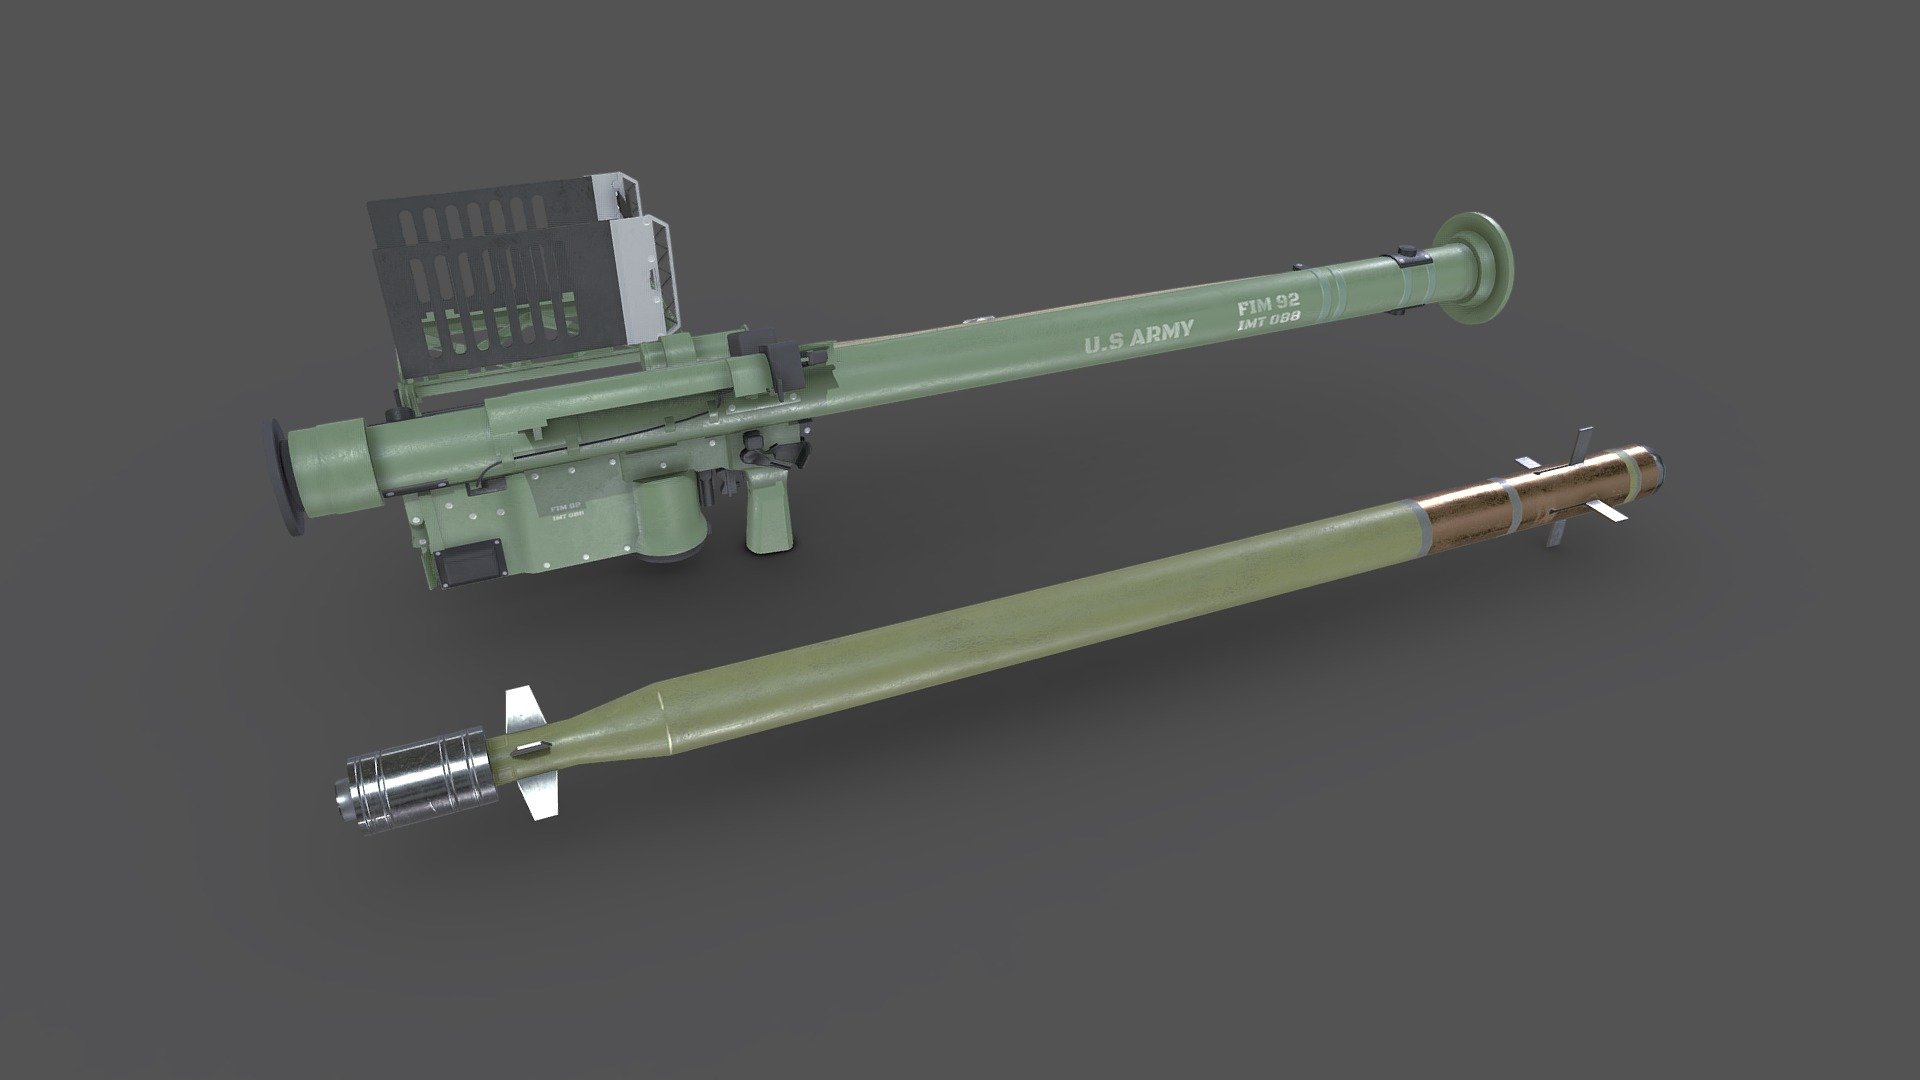 FIM-92 Stinger




Created in 3ds MAX 2018 no plugins used.

Low-poly (12,489 Tris) ready to use in games, AR/VR.

Textures are in PNG format 4096x4096 and 2048x2048(for rocket) PBR metalness 2 set textures.

Available formats: MAX 2018 and 2015, OBJ, MTL, FBX, .tbscene.

Files unit: Centimeters.

If you need any other file format you can always request it.

All formats include materials and textures.

check the collection click here - FIM-92 Stinger - Buy Royalty Free 3D model by MaX3Dd 3d model